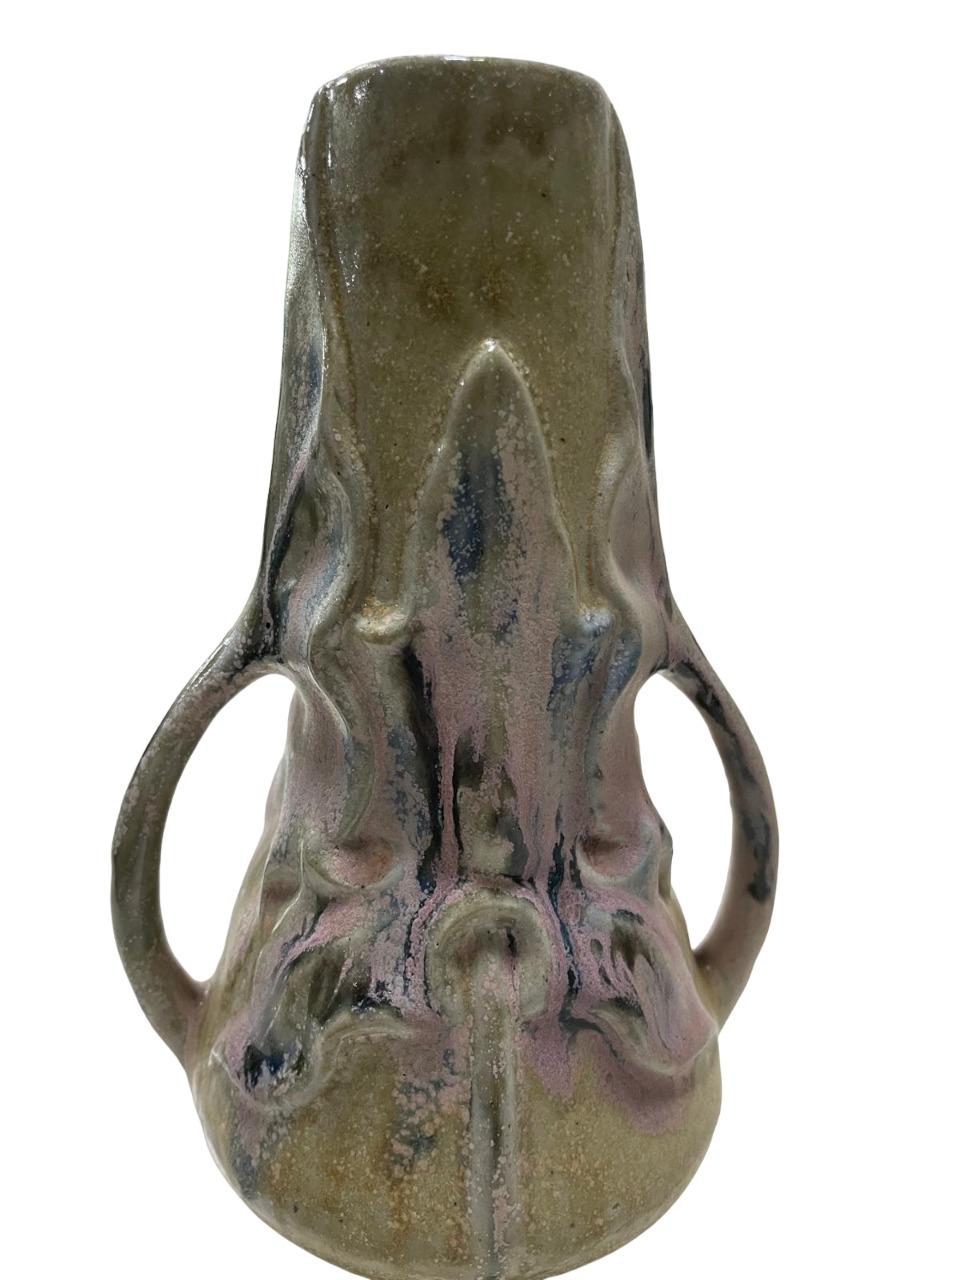 ART NOUVEAU two-handled GREBER Vase, with some pink flashes, refined ceramic For Sale 10